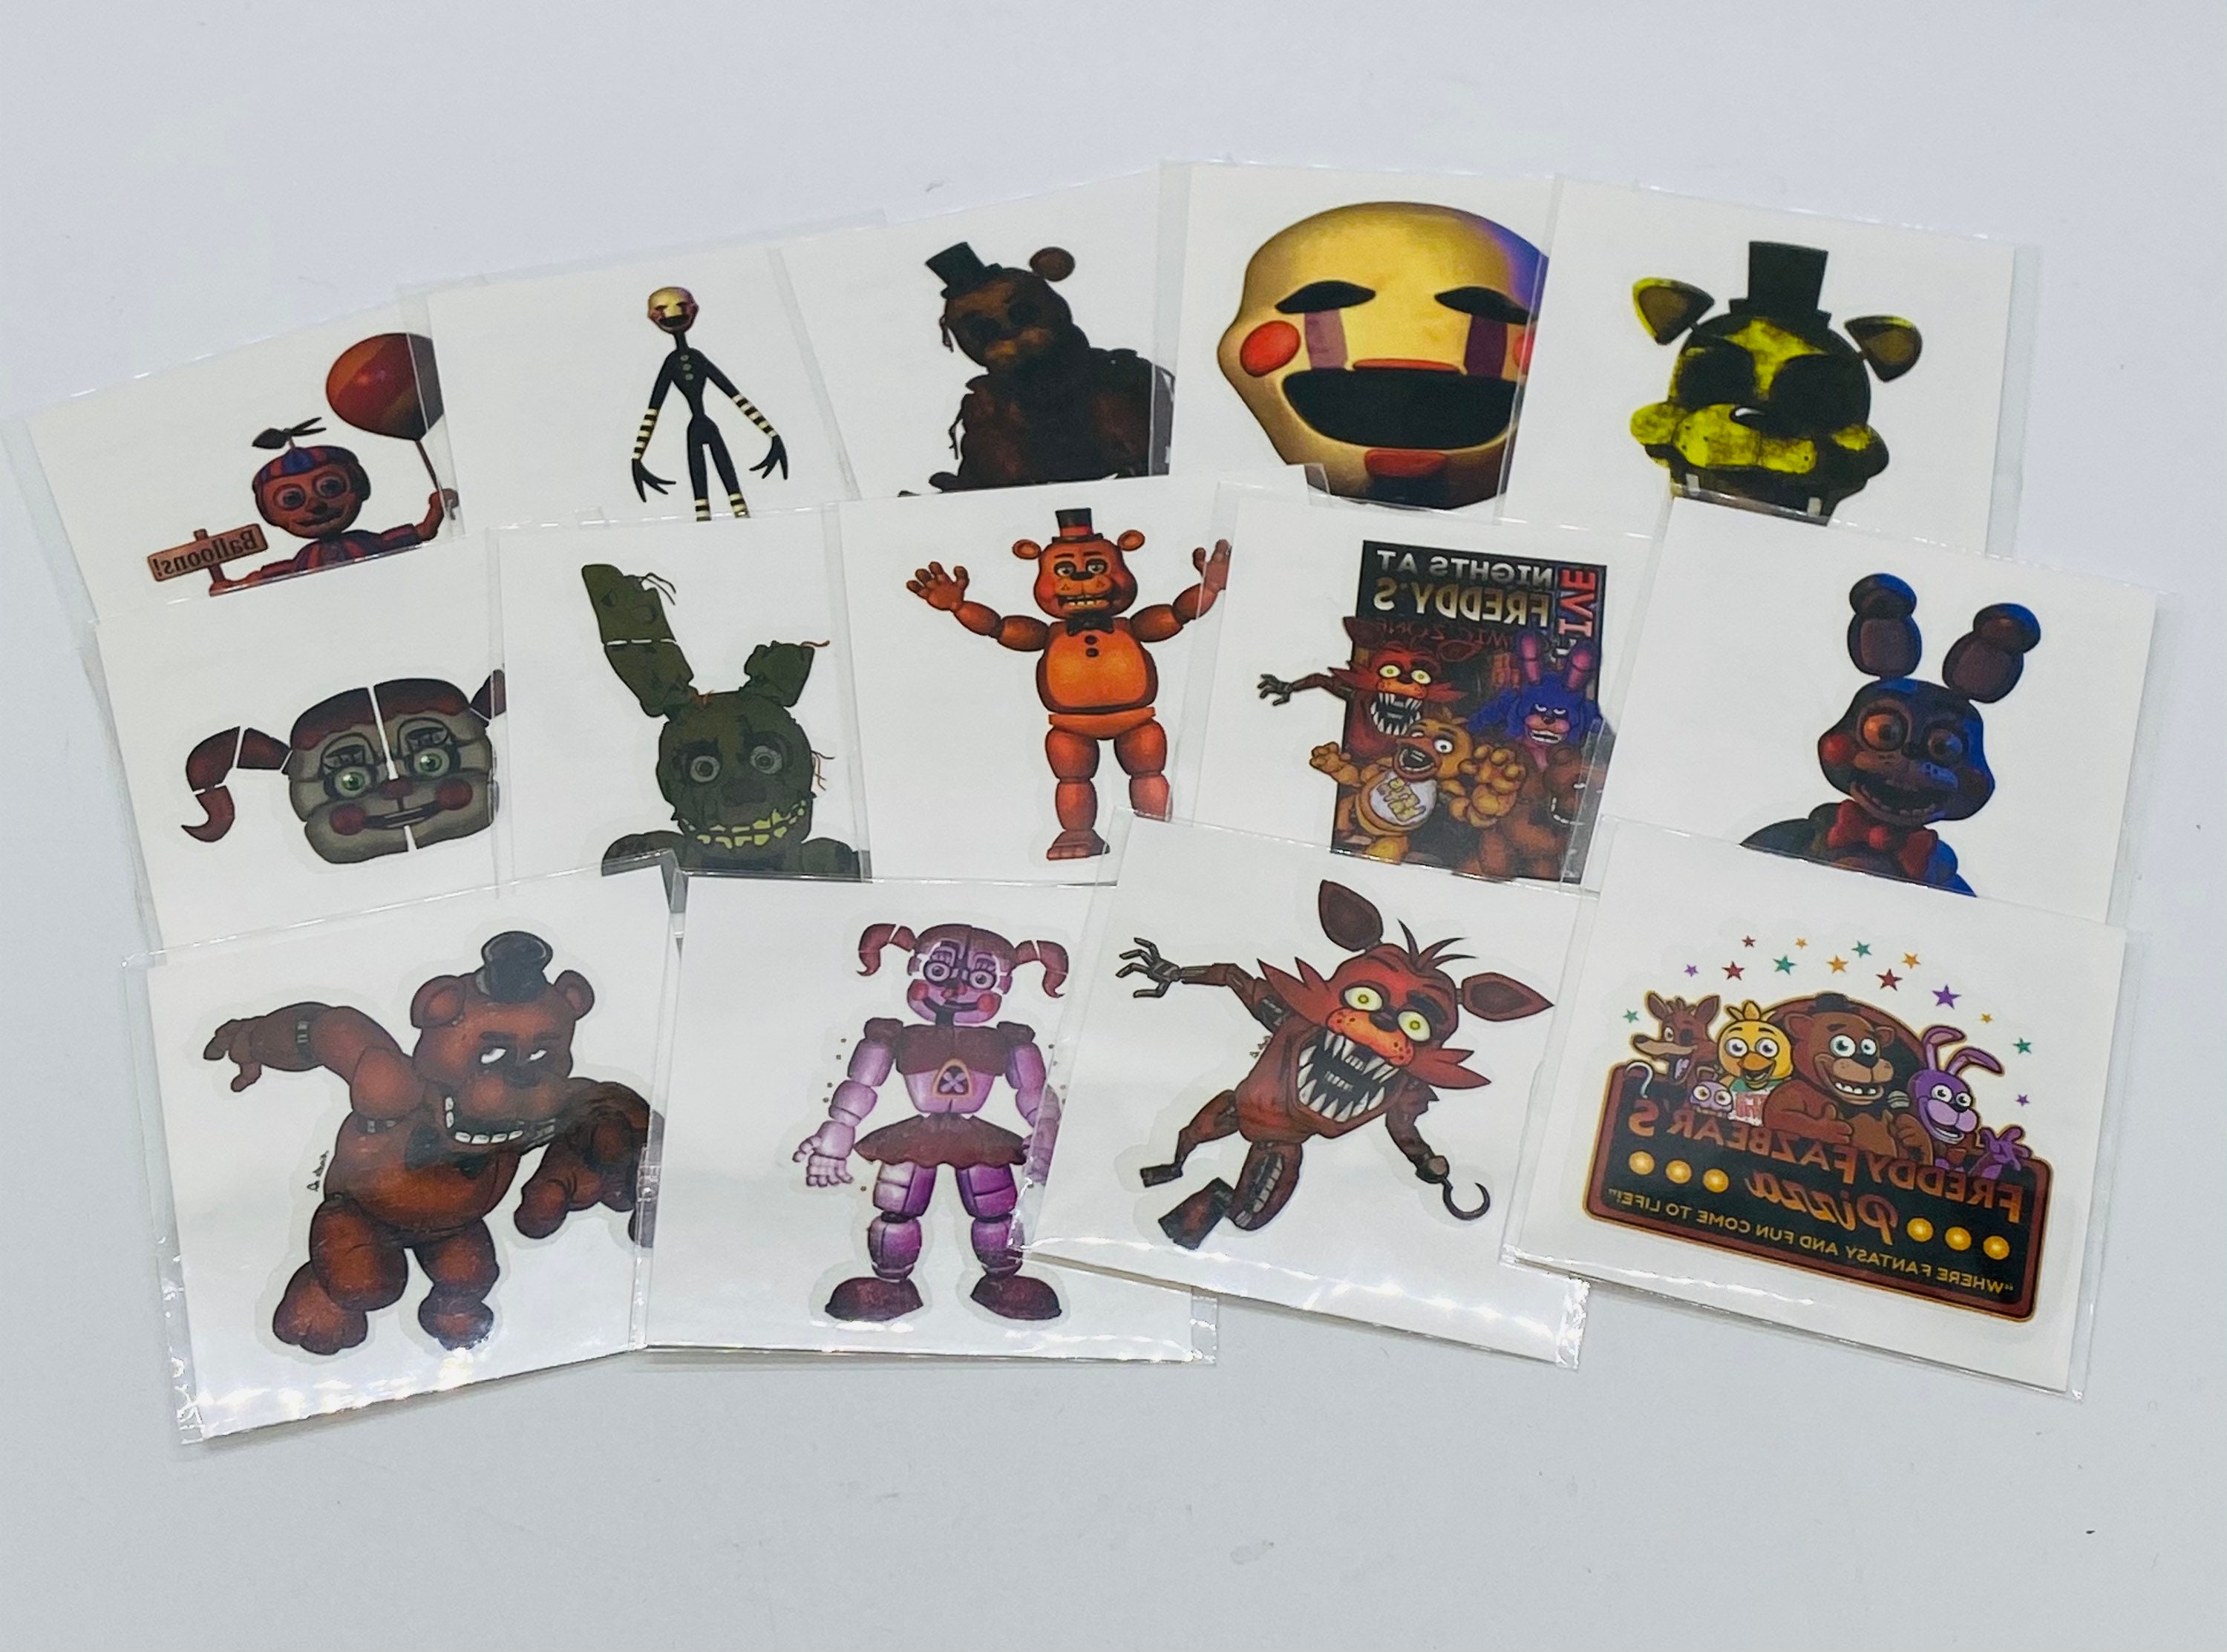 Five Nights at Freddys Temporary Tattoos  Freddy Fazbear  Bonnie  Chica   Foxy  Mangle  Pack of 18  Party Supplies  Skin Safe  MADE IN THE USA